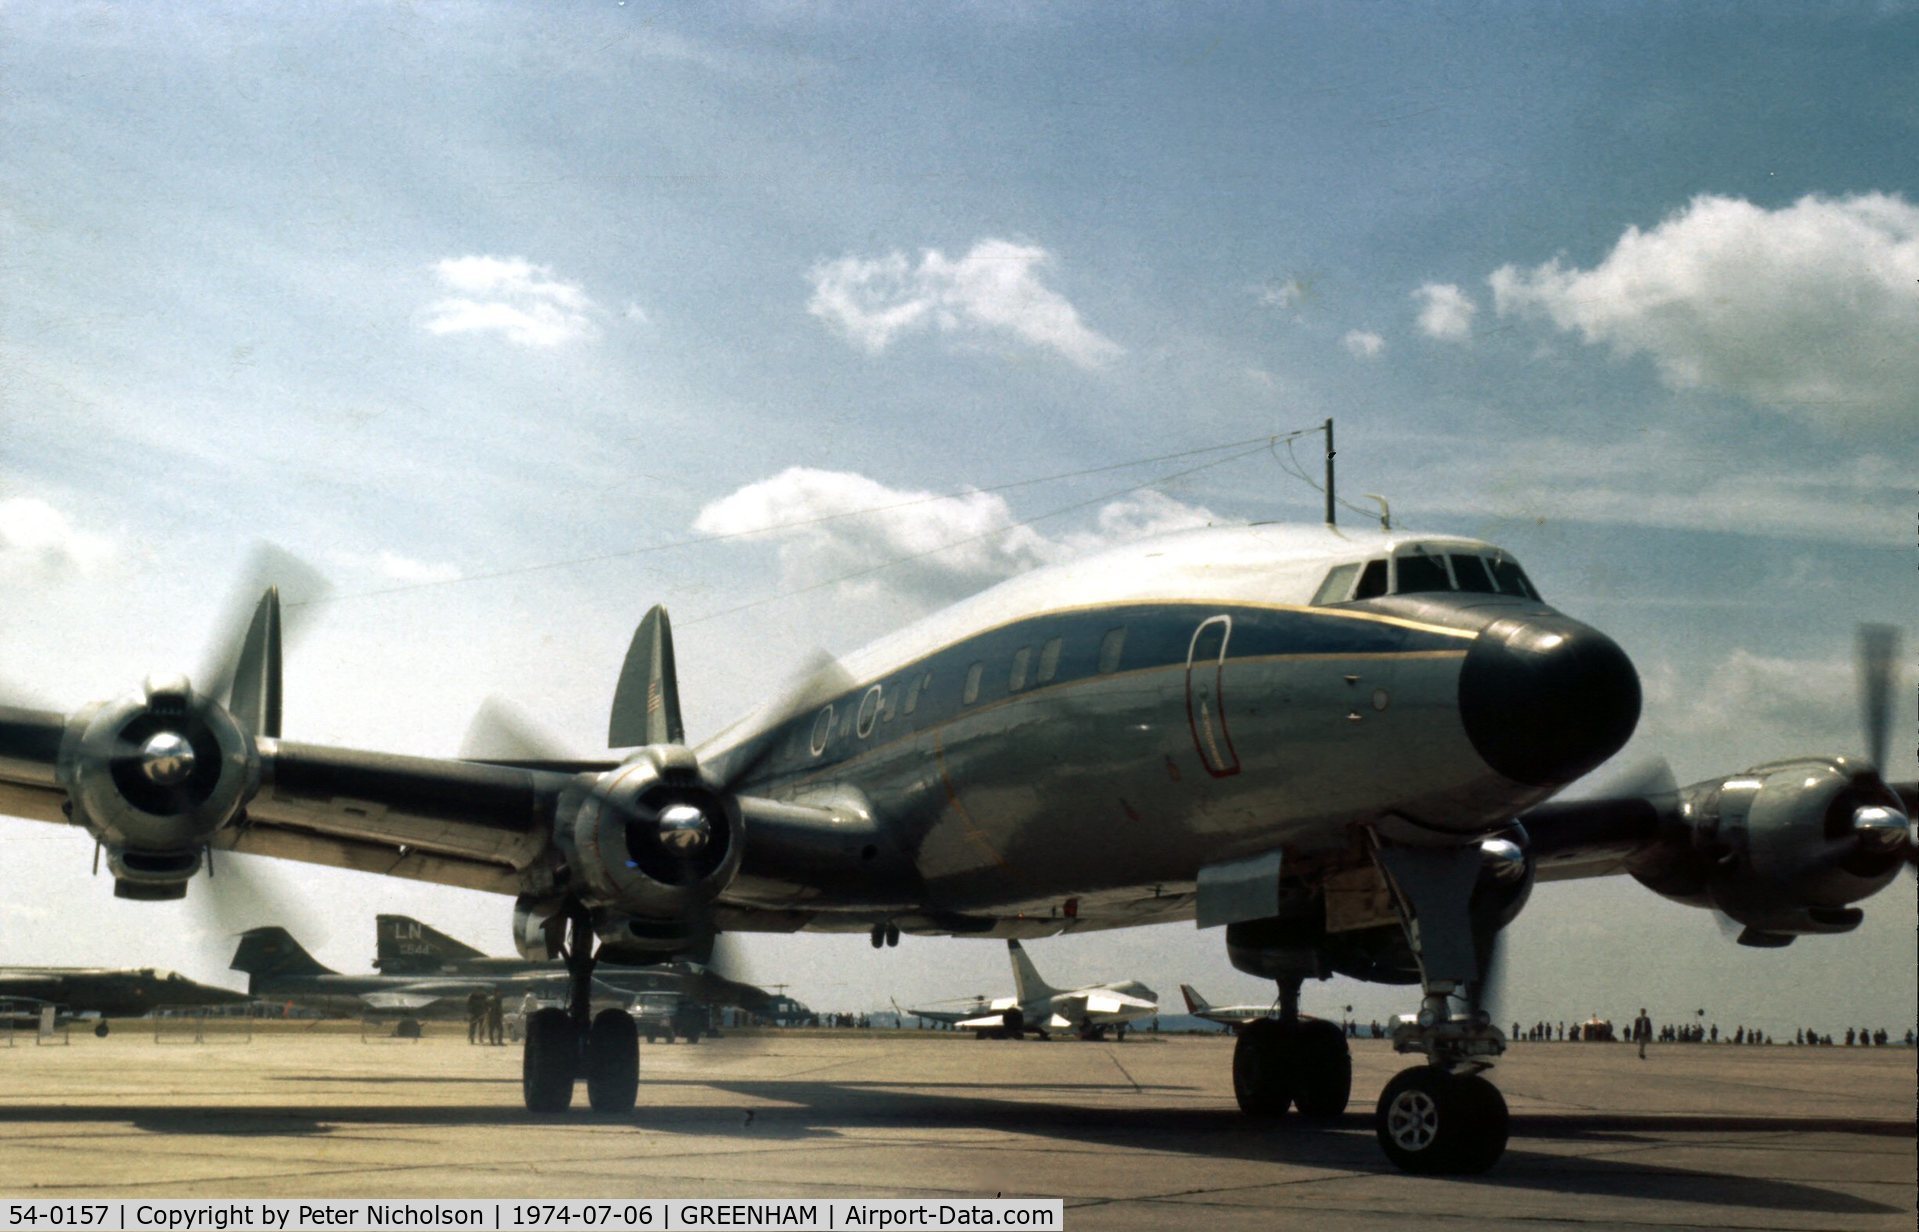 54-0157, 1955 Lockheed L-1049F Super Constellation C/N 4176, Another view of the C-121C, callsign Runt 05, of Pennsylvanian ANG's 193rd Tactical Electronic Warfare Squadron on display at the 1974 Intnl Air Tattoo at RAF Greenham Common.